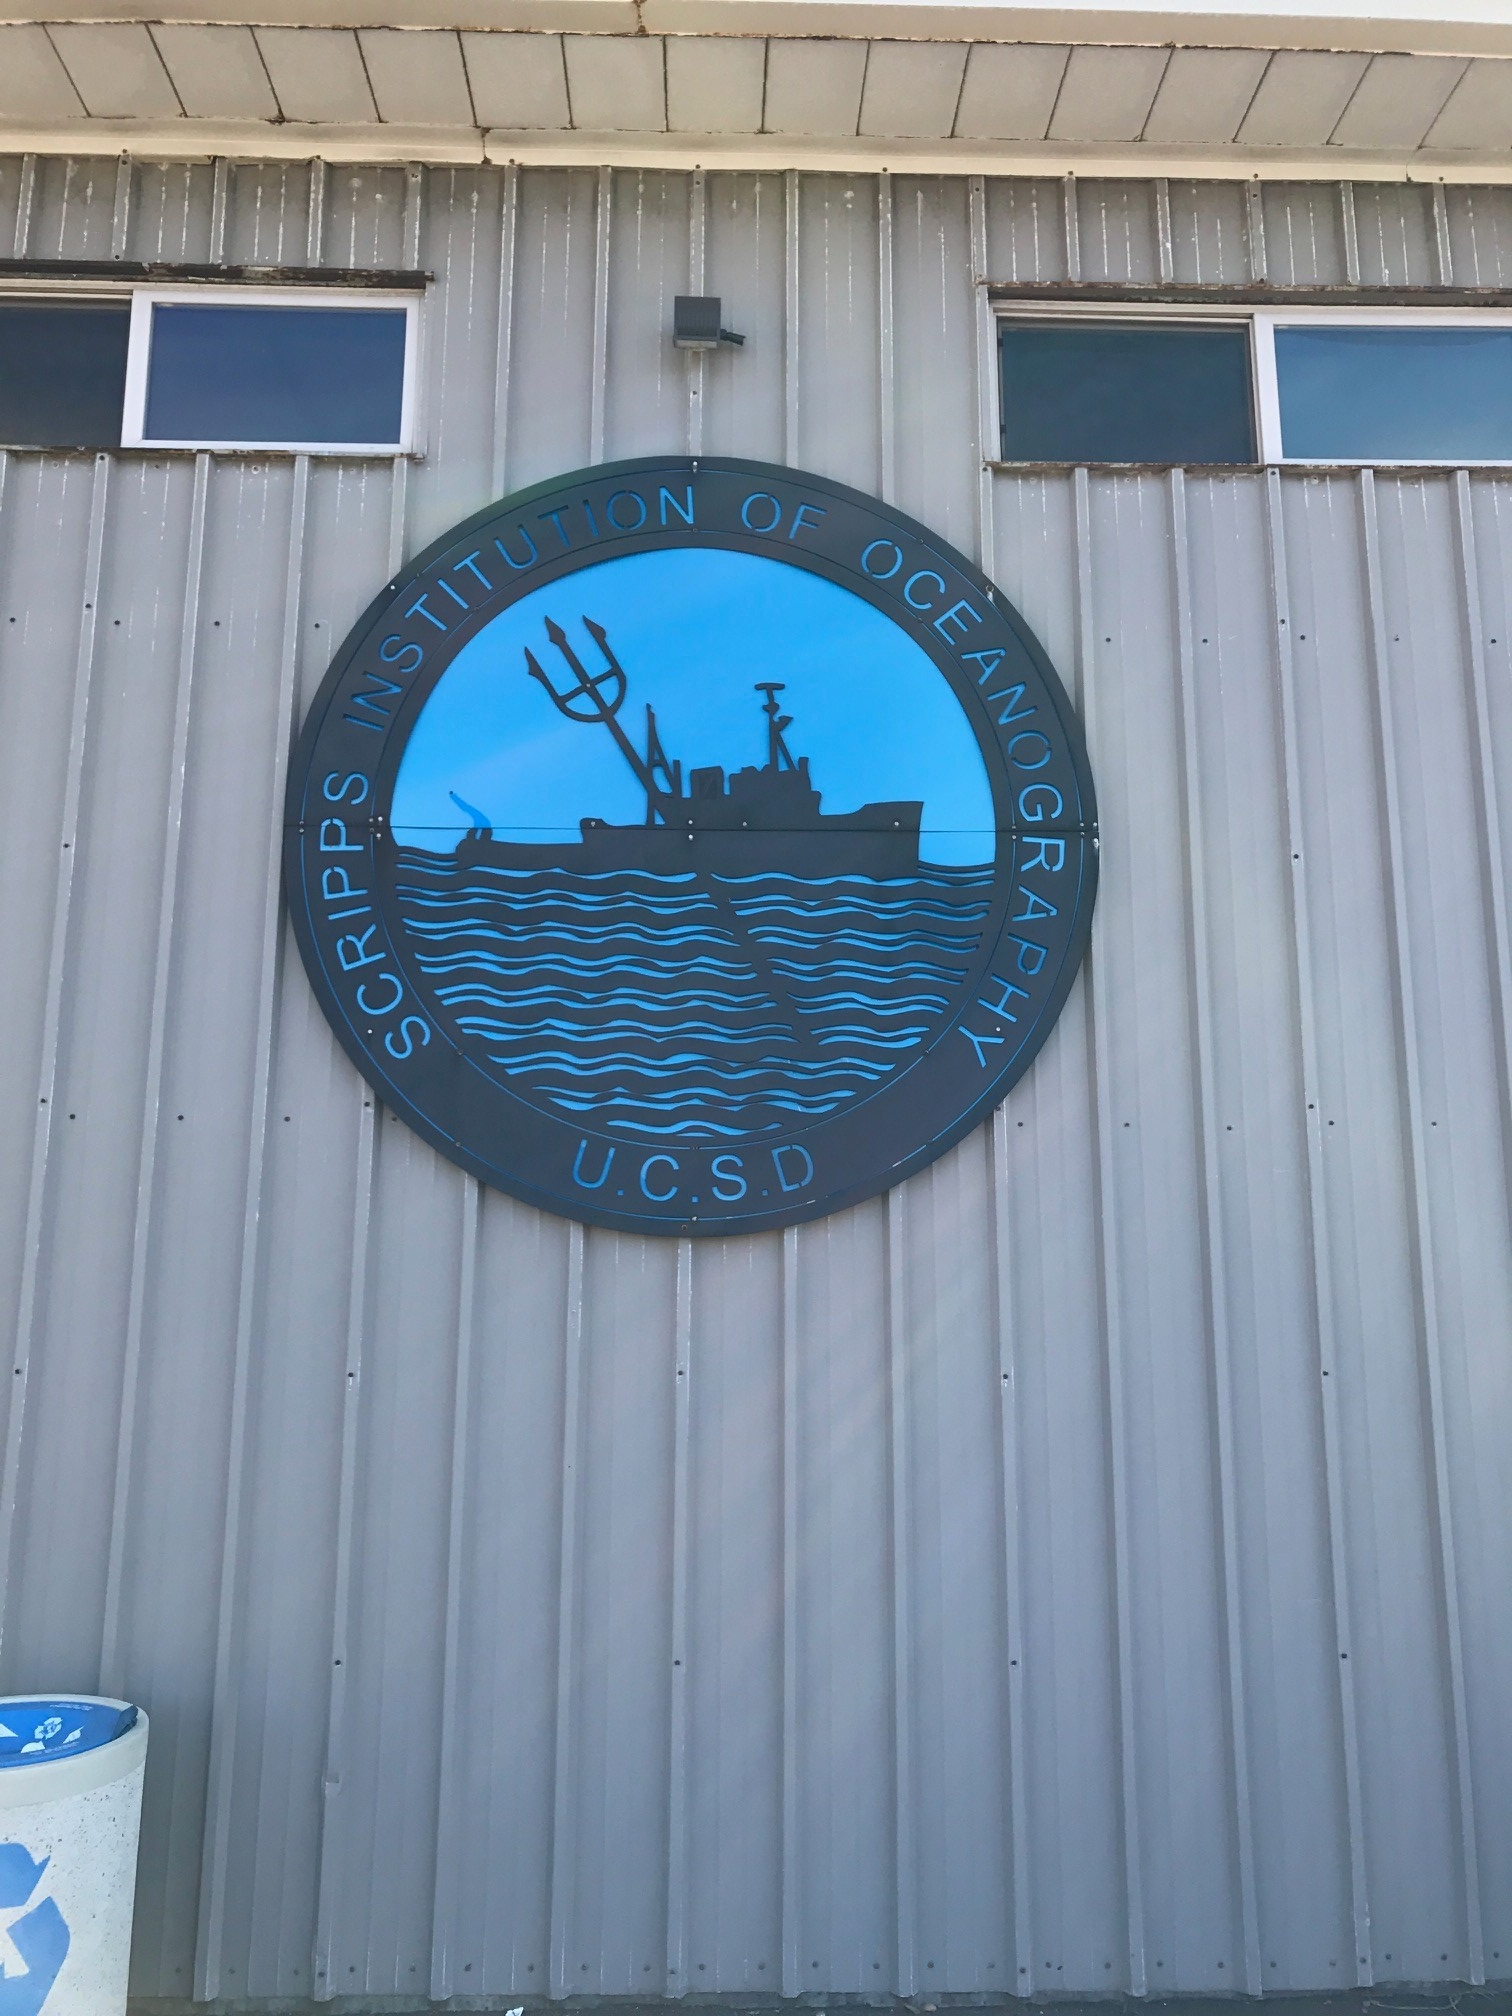 circular Scripps emblem including graphic ship with trident crossing the circle